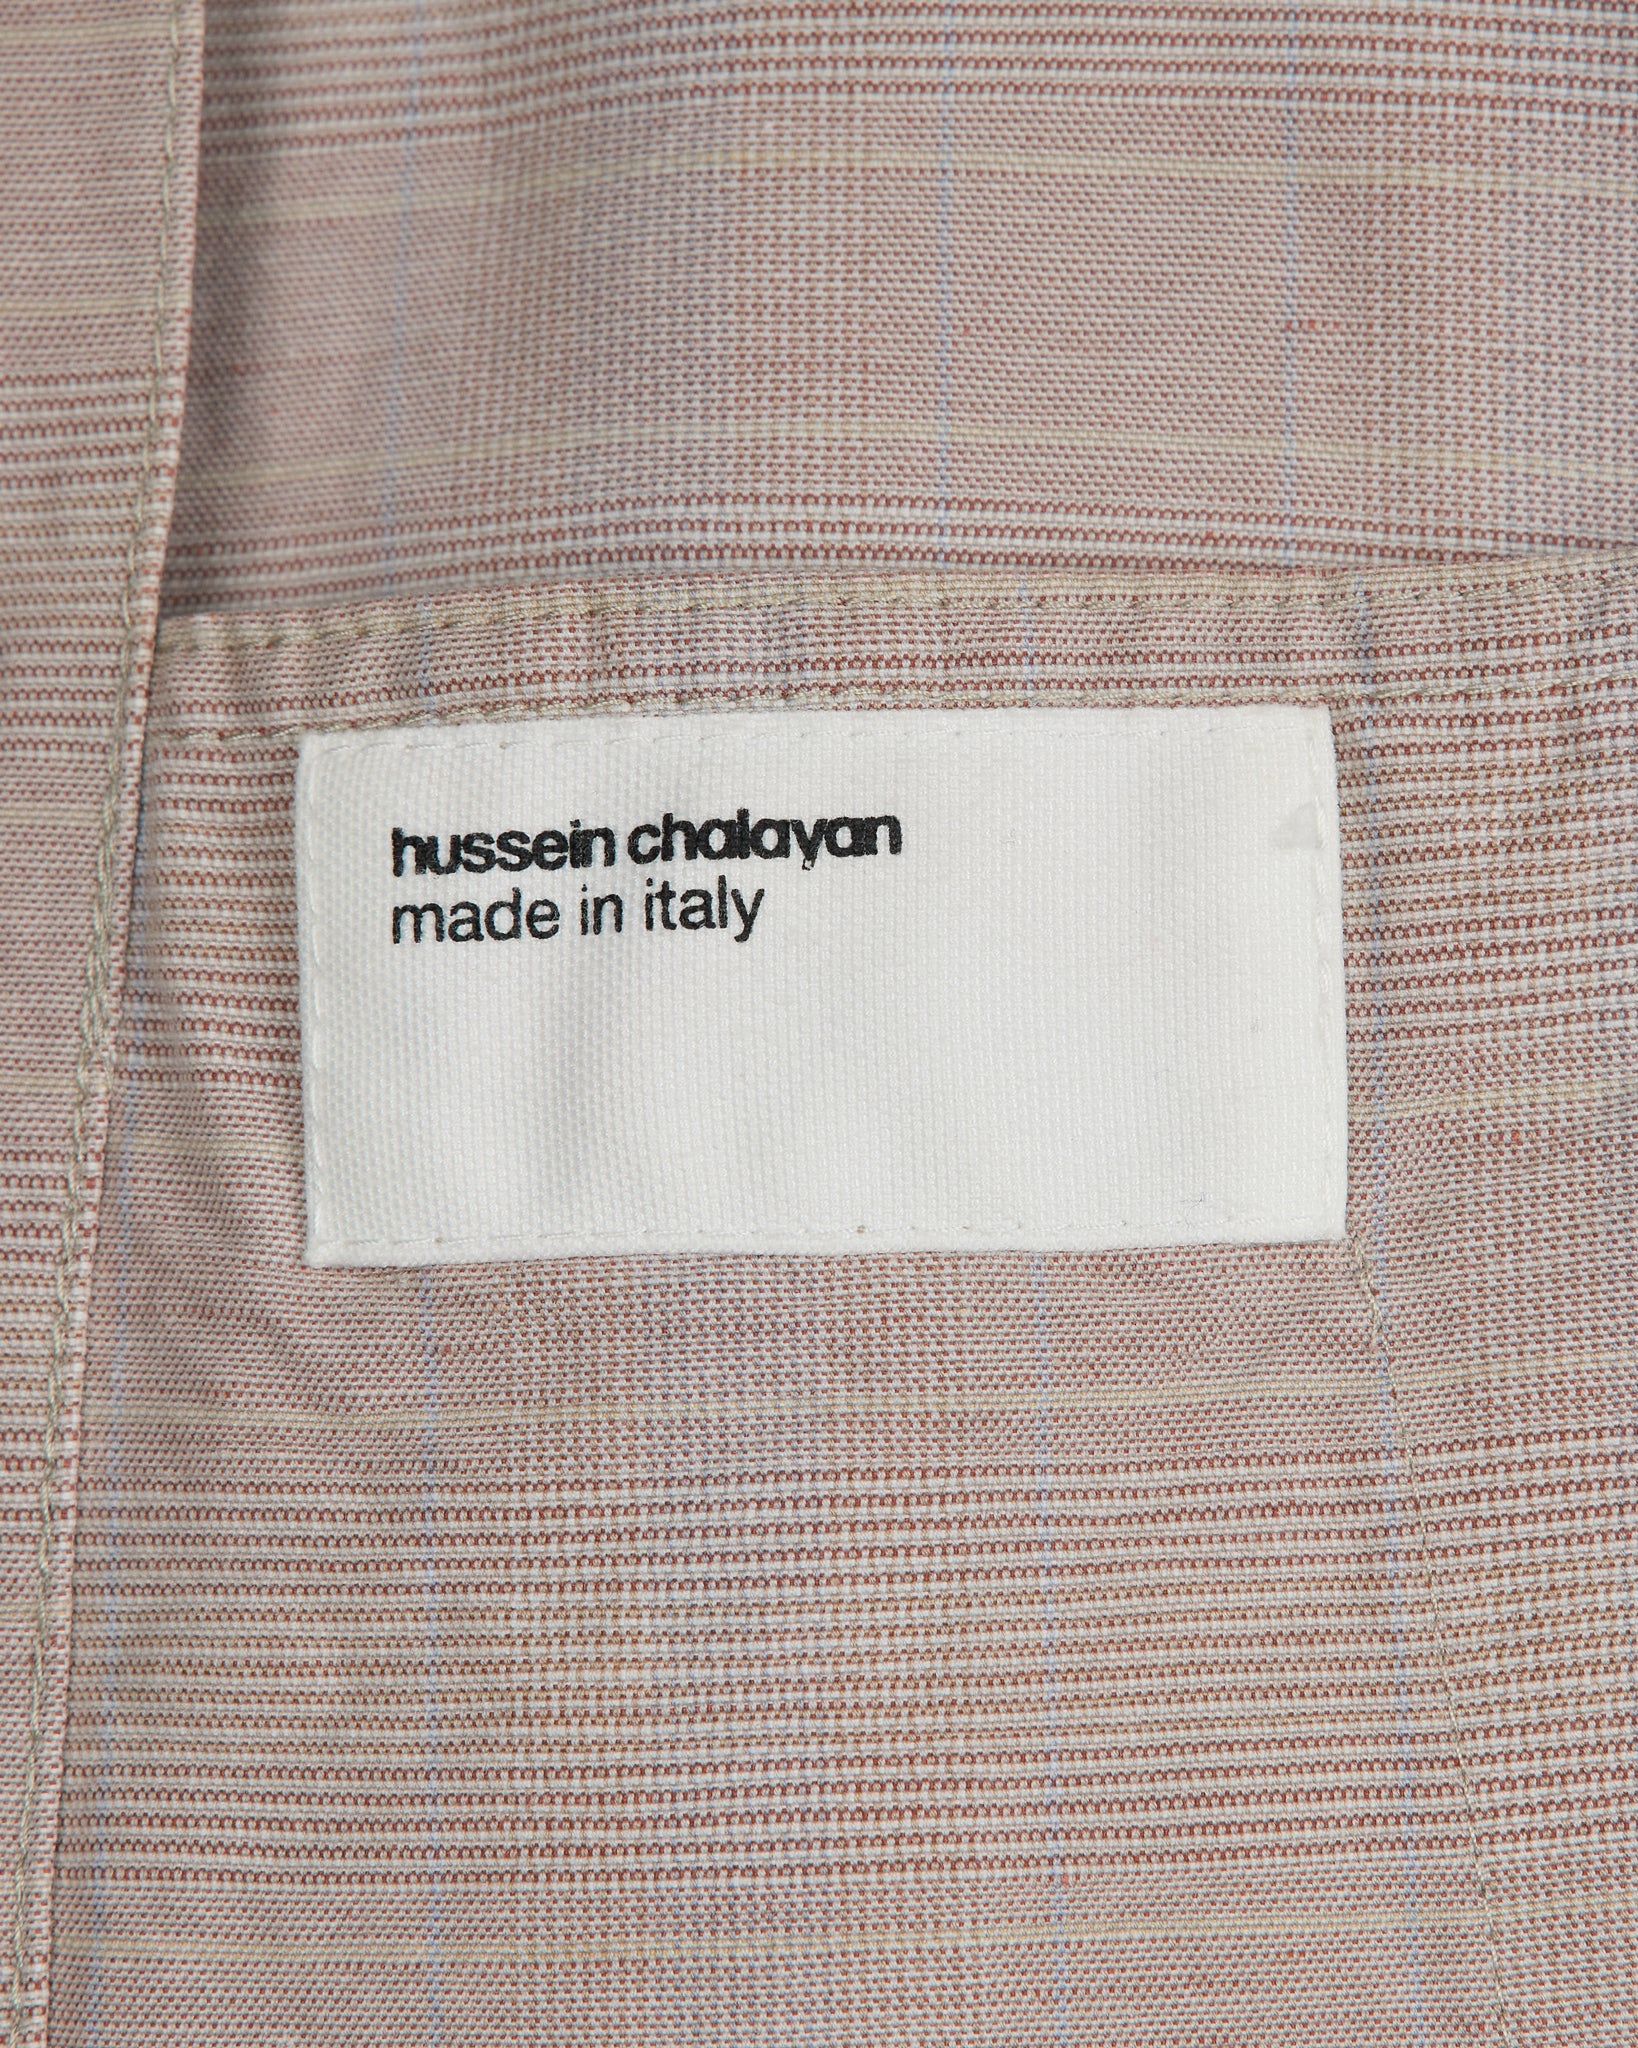 Hussein Chalayan Micro Striped Plaid Work Jacket - SS05 "Act to Institution" tag photo